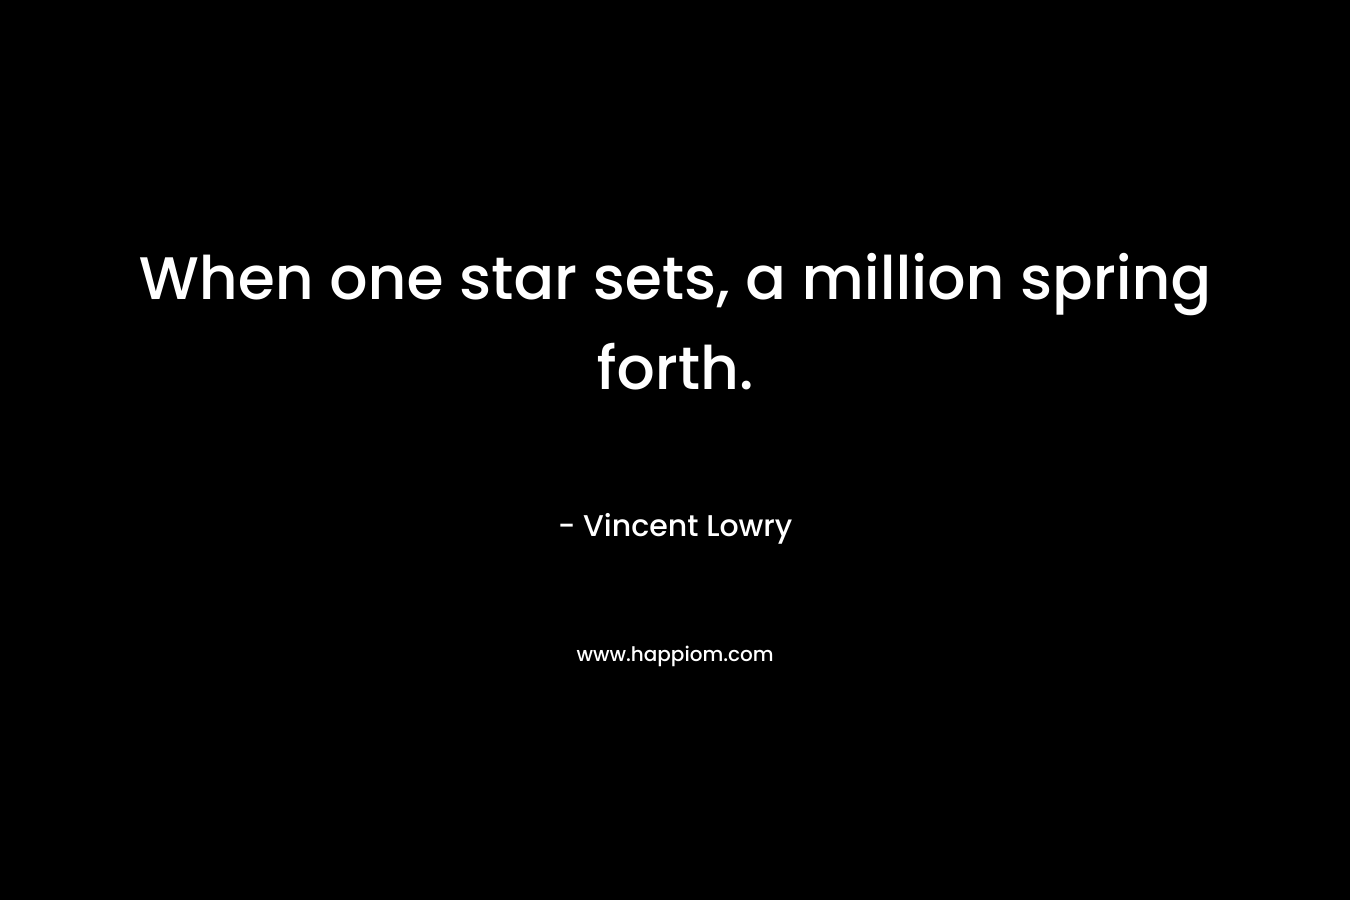 When one star sets, a million spring forth. – Vincent Lowry